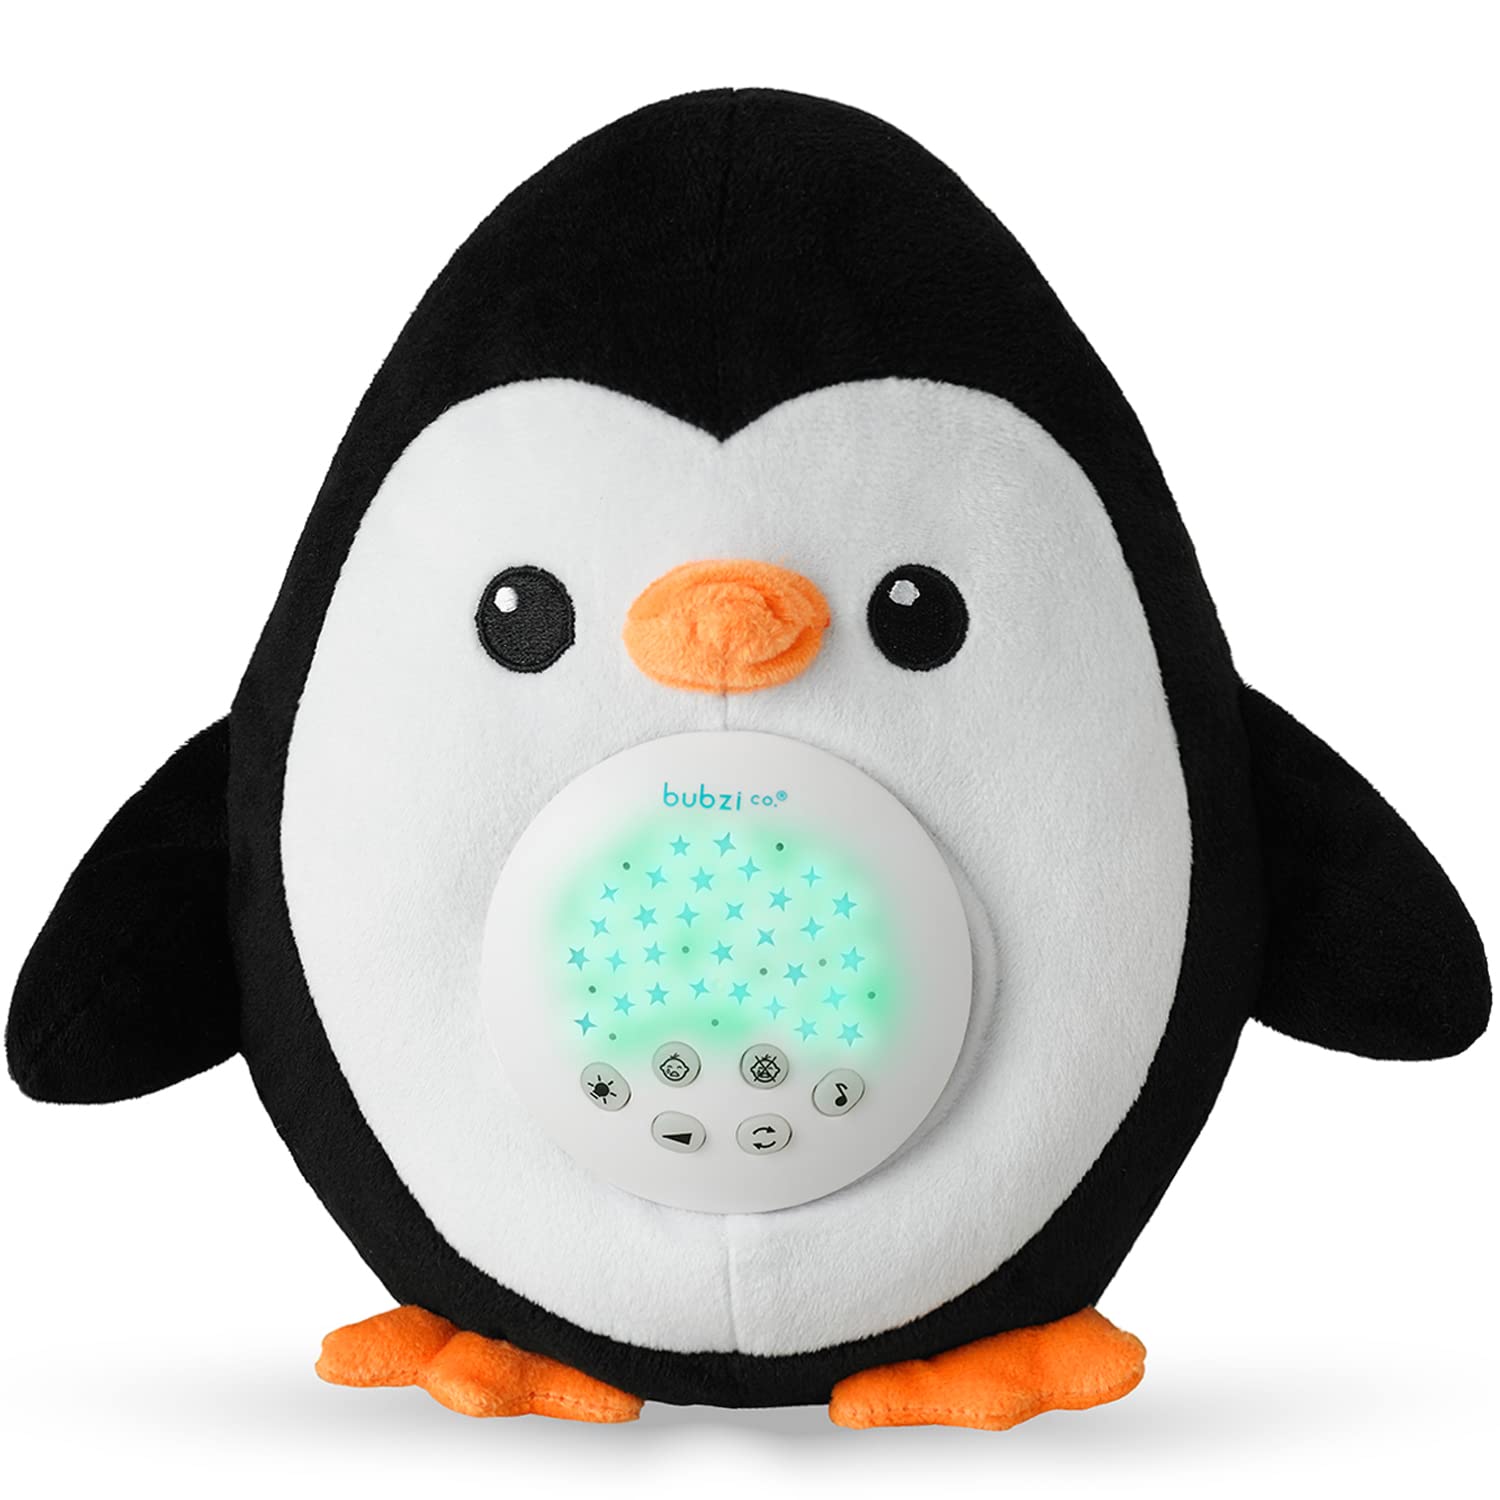 Bubzi Co Baby Soother cry Activated Sensor Toys Penguin White Noise Sound Machine, Toddler Sleep Aid Night Light, Unique Baby girl gifts 